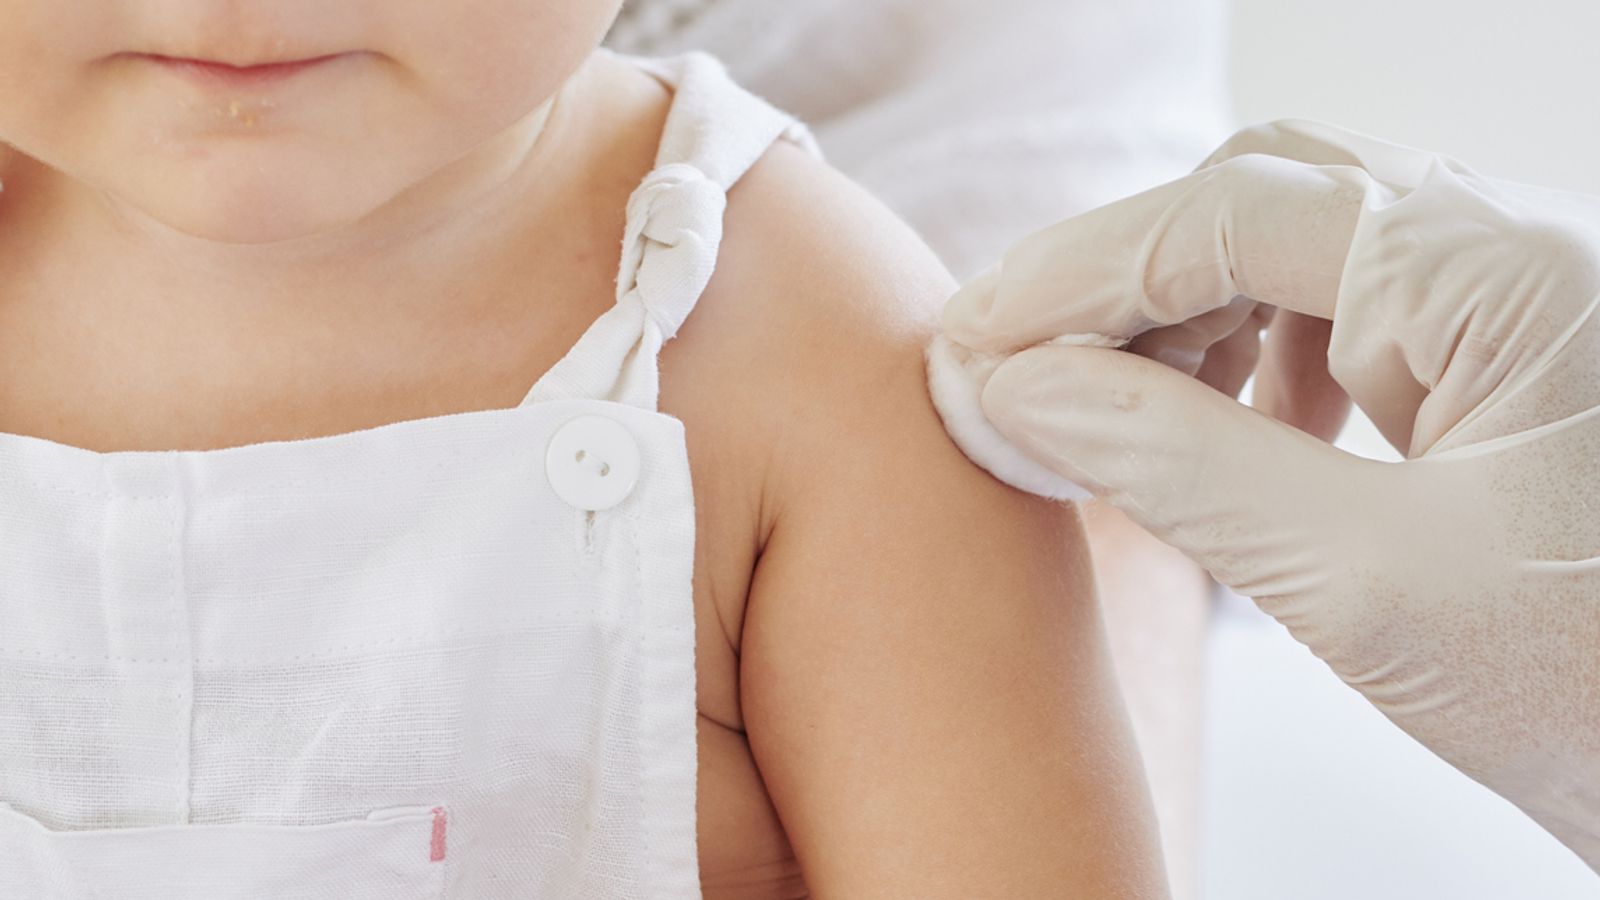 Chickenpox vaccine should be offered to all children on the NHS, experts recommend